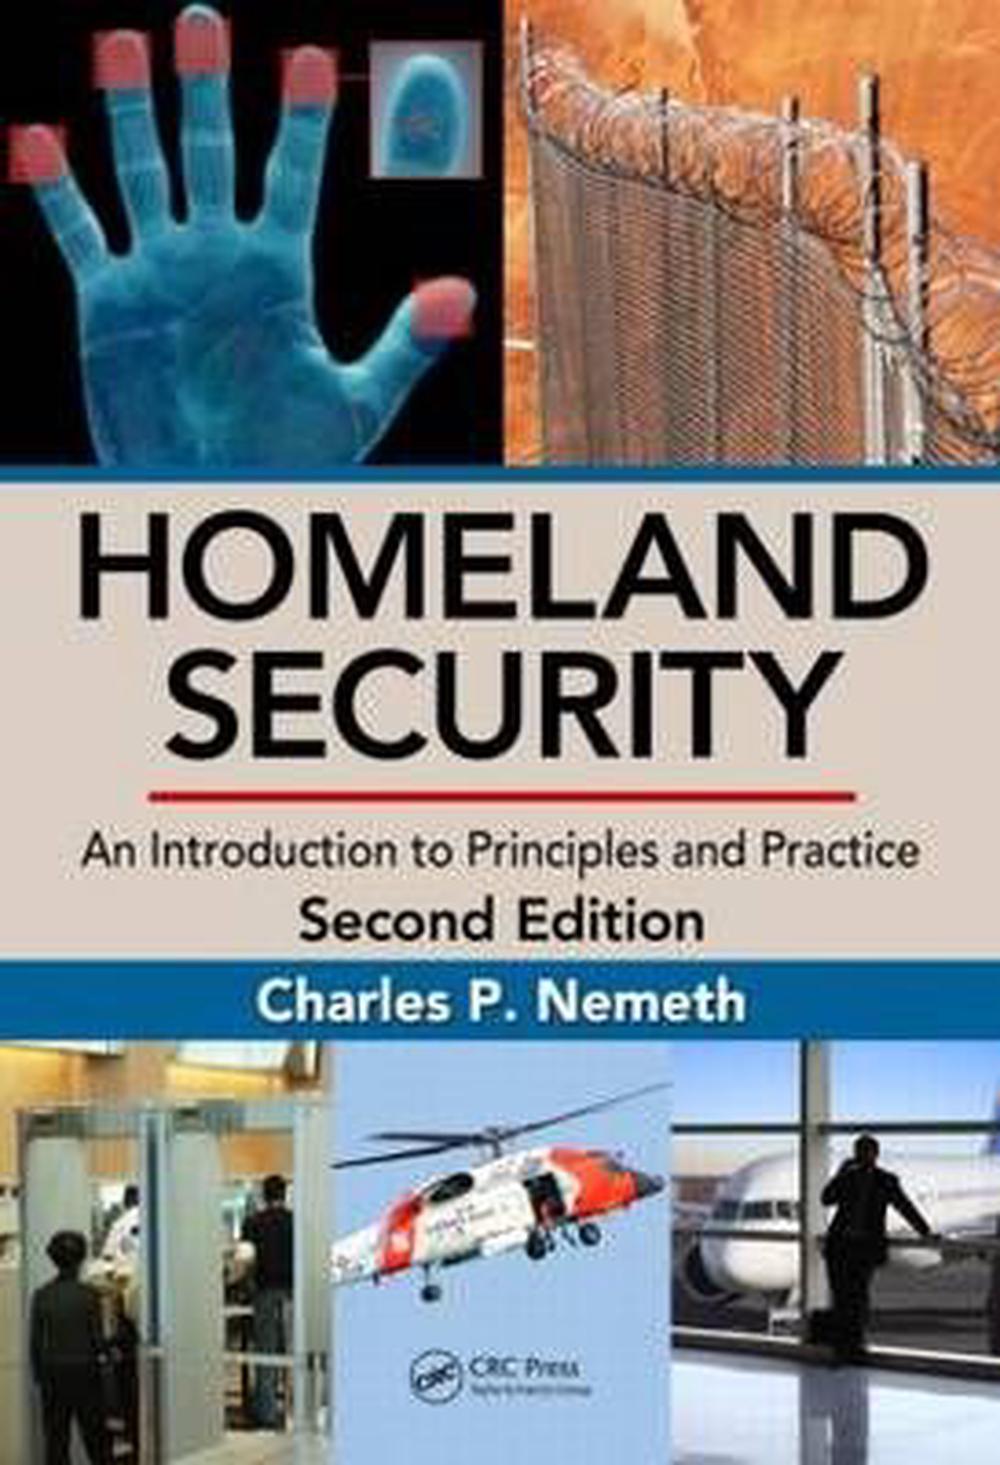 Homeland Security An Introduction to Principles and Practice, Second Edition by Charles P